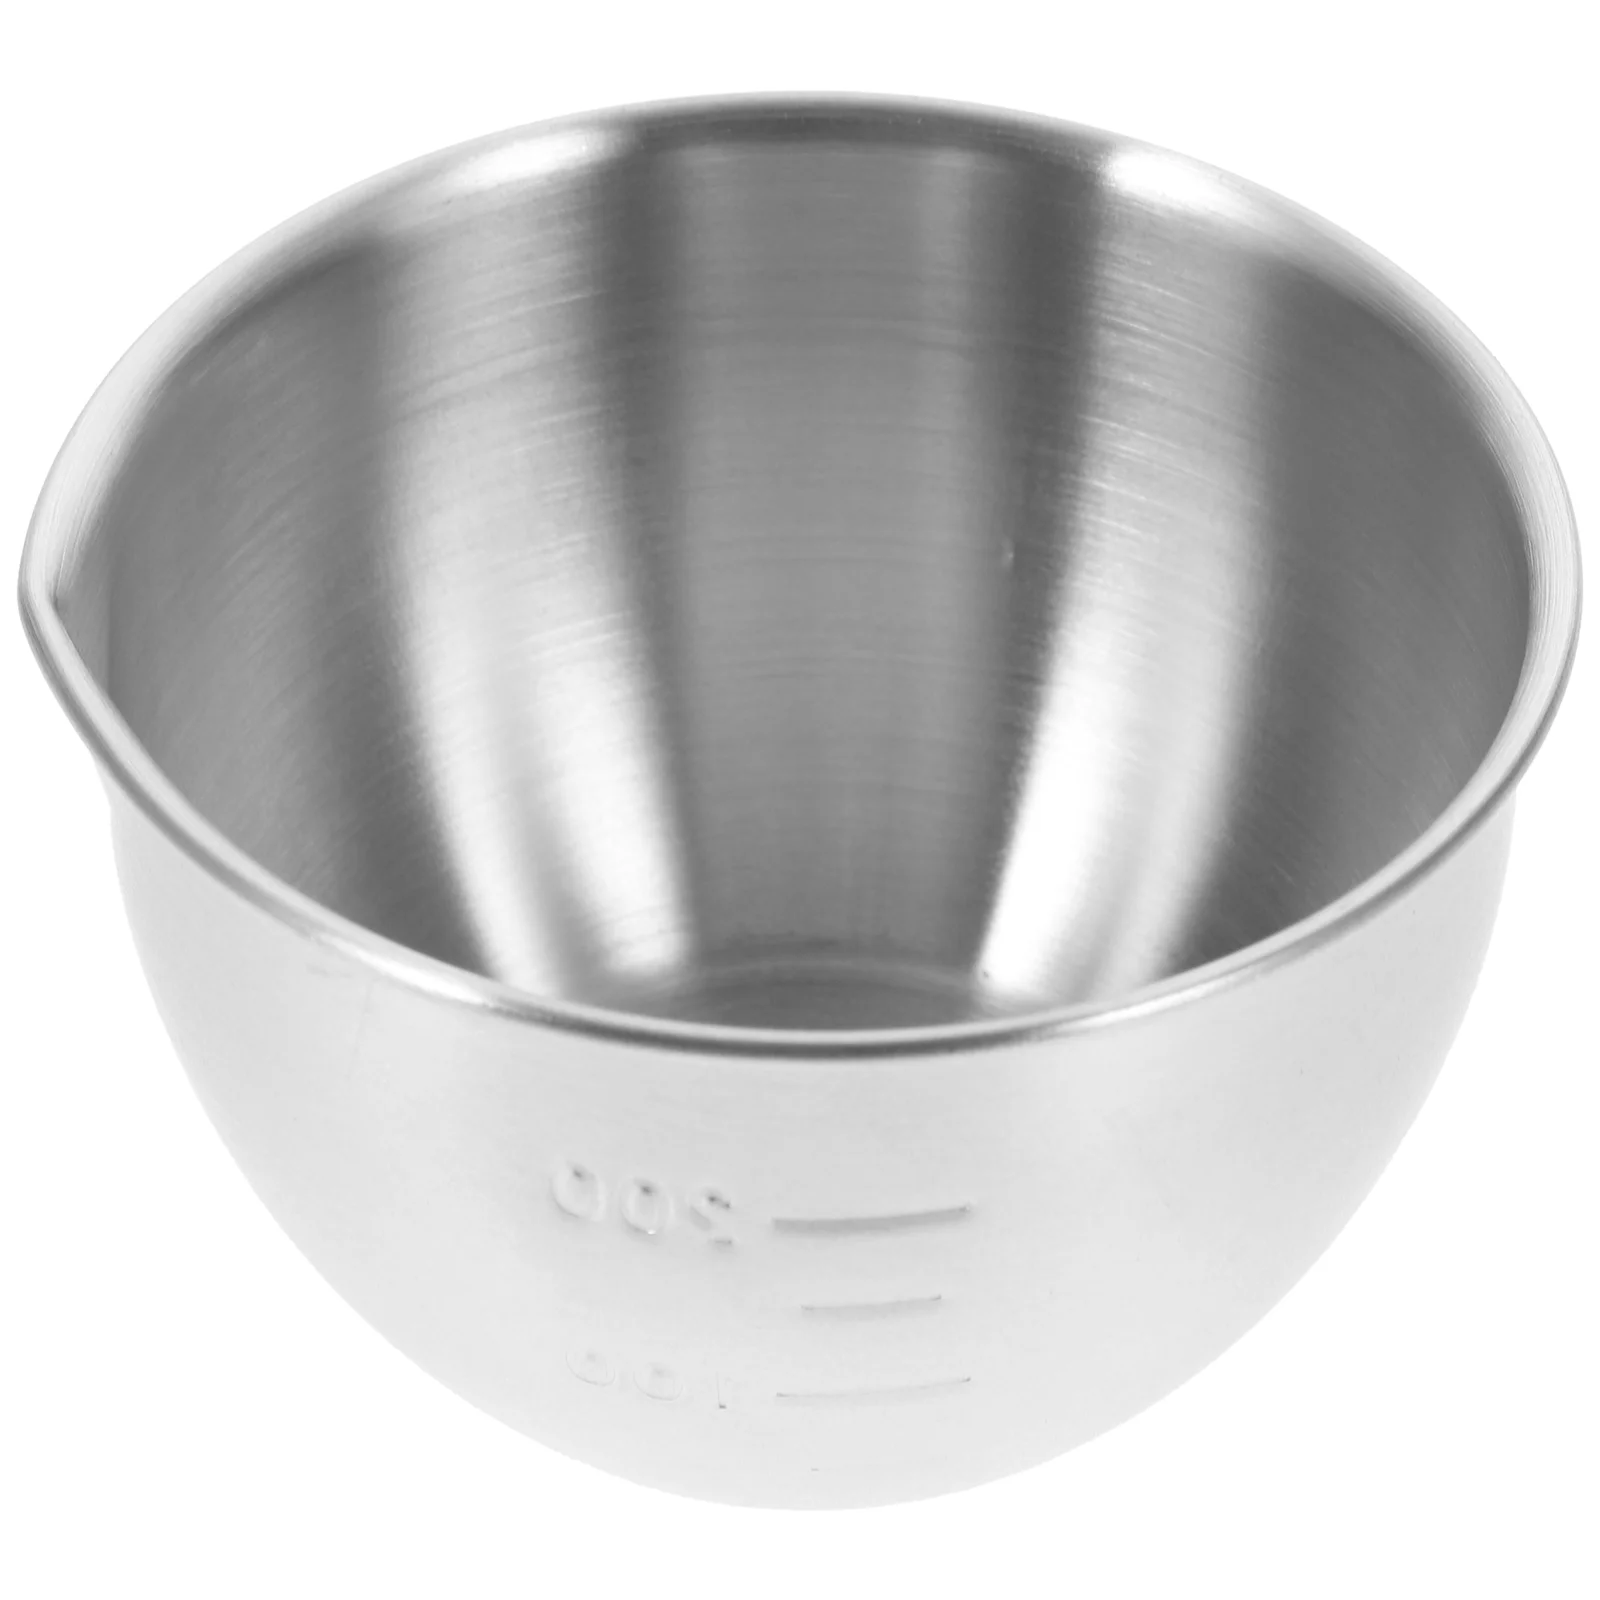 

Bowl Pot Soup Egg Mixing Metal Bowls Salad Dessert Plate Container Cooking Basin Appetizer Steel Cream Ice Tray Serving Cereal